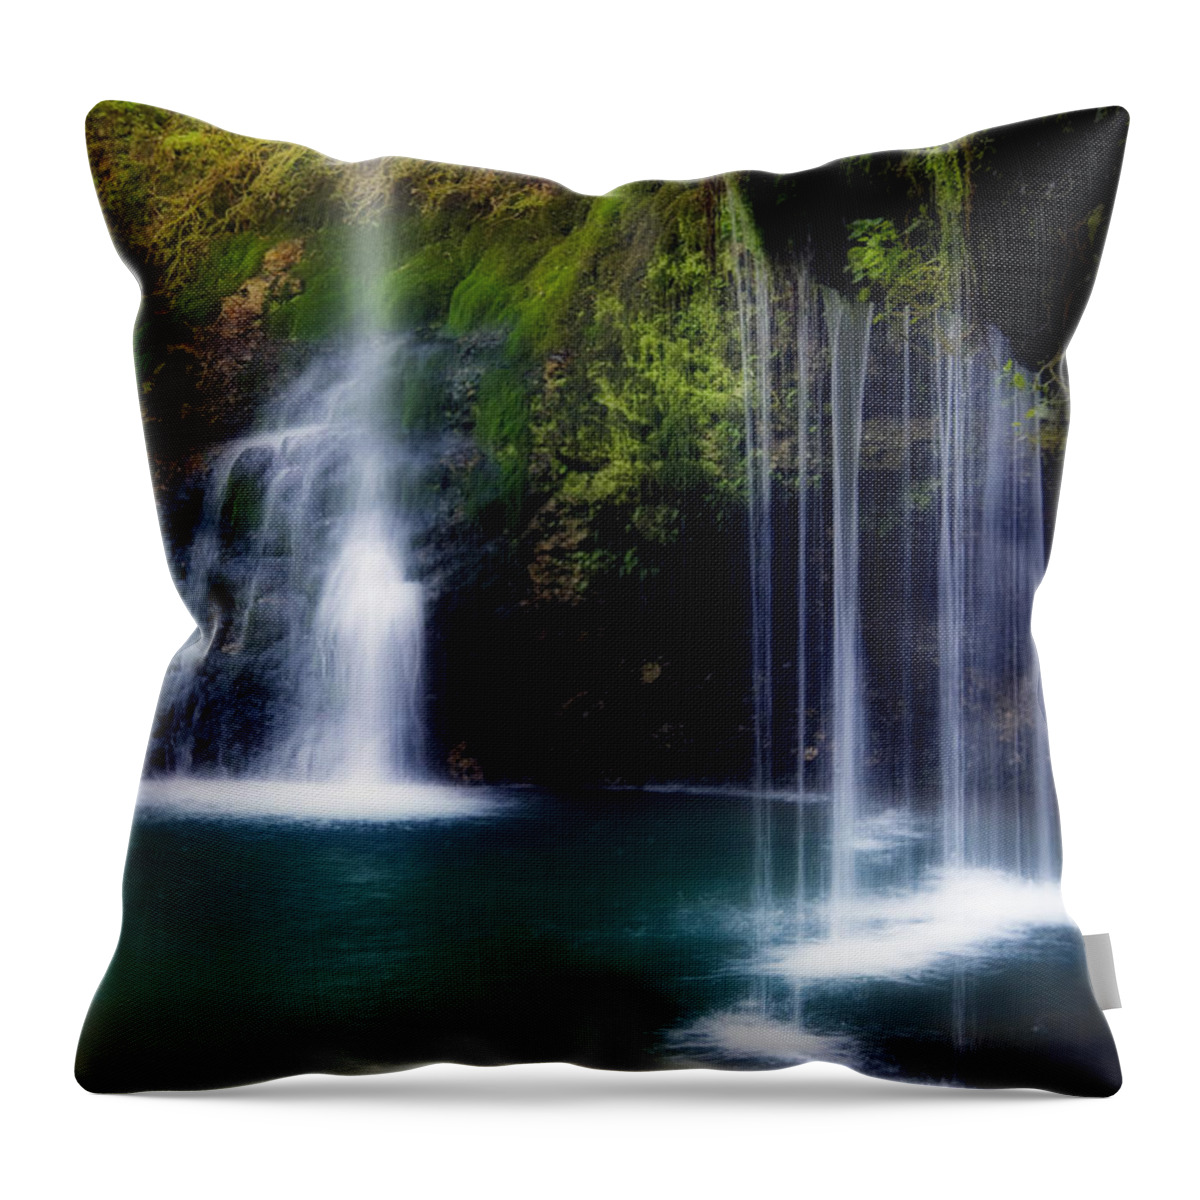 Falls Throw Pillow featuring the photograph Natural Falls by Lana Trussell